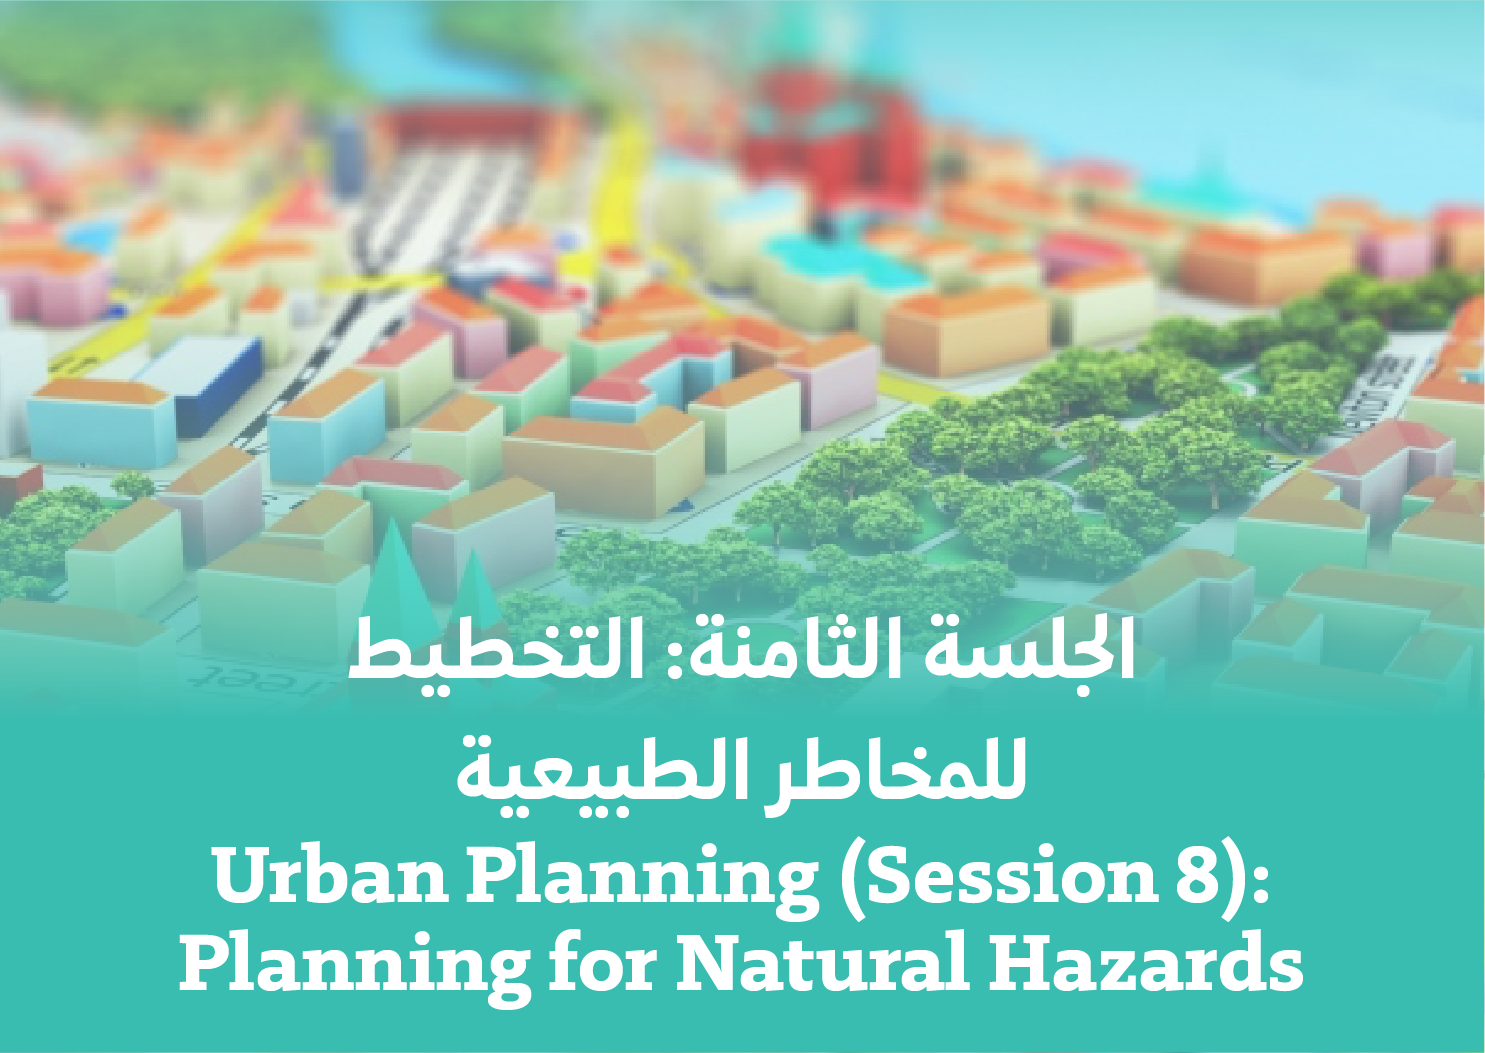 Session 8: Planning for Natural Hazards